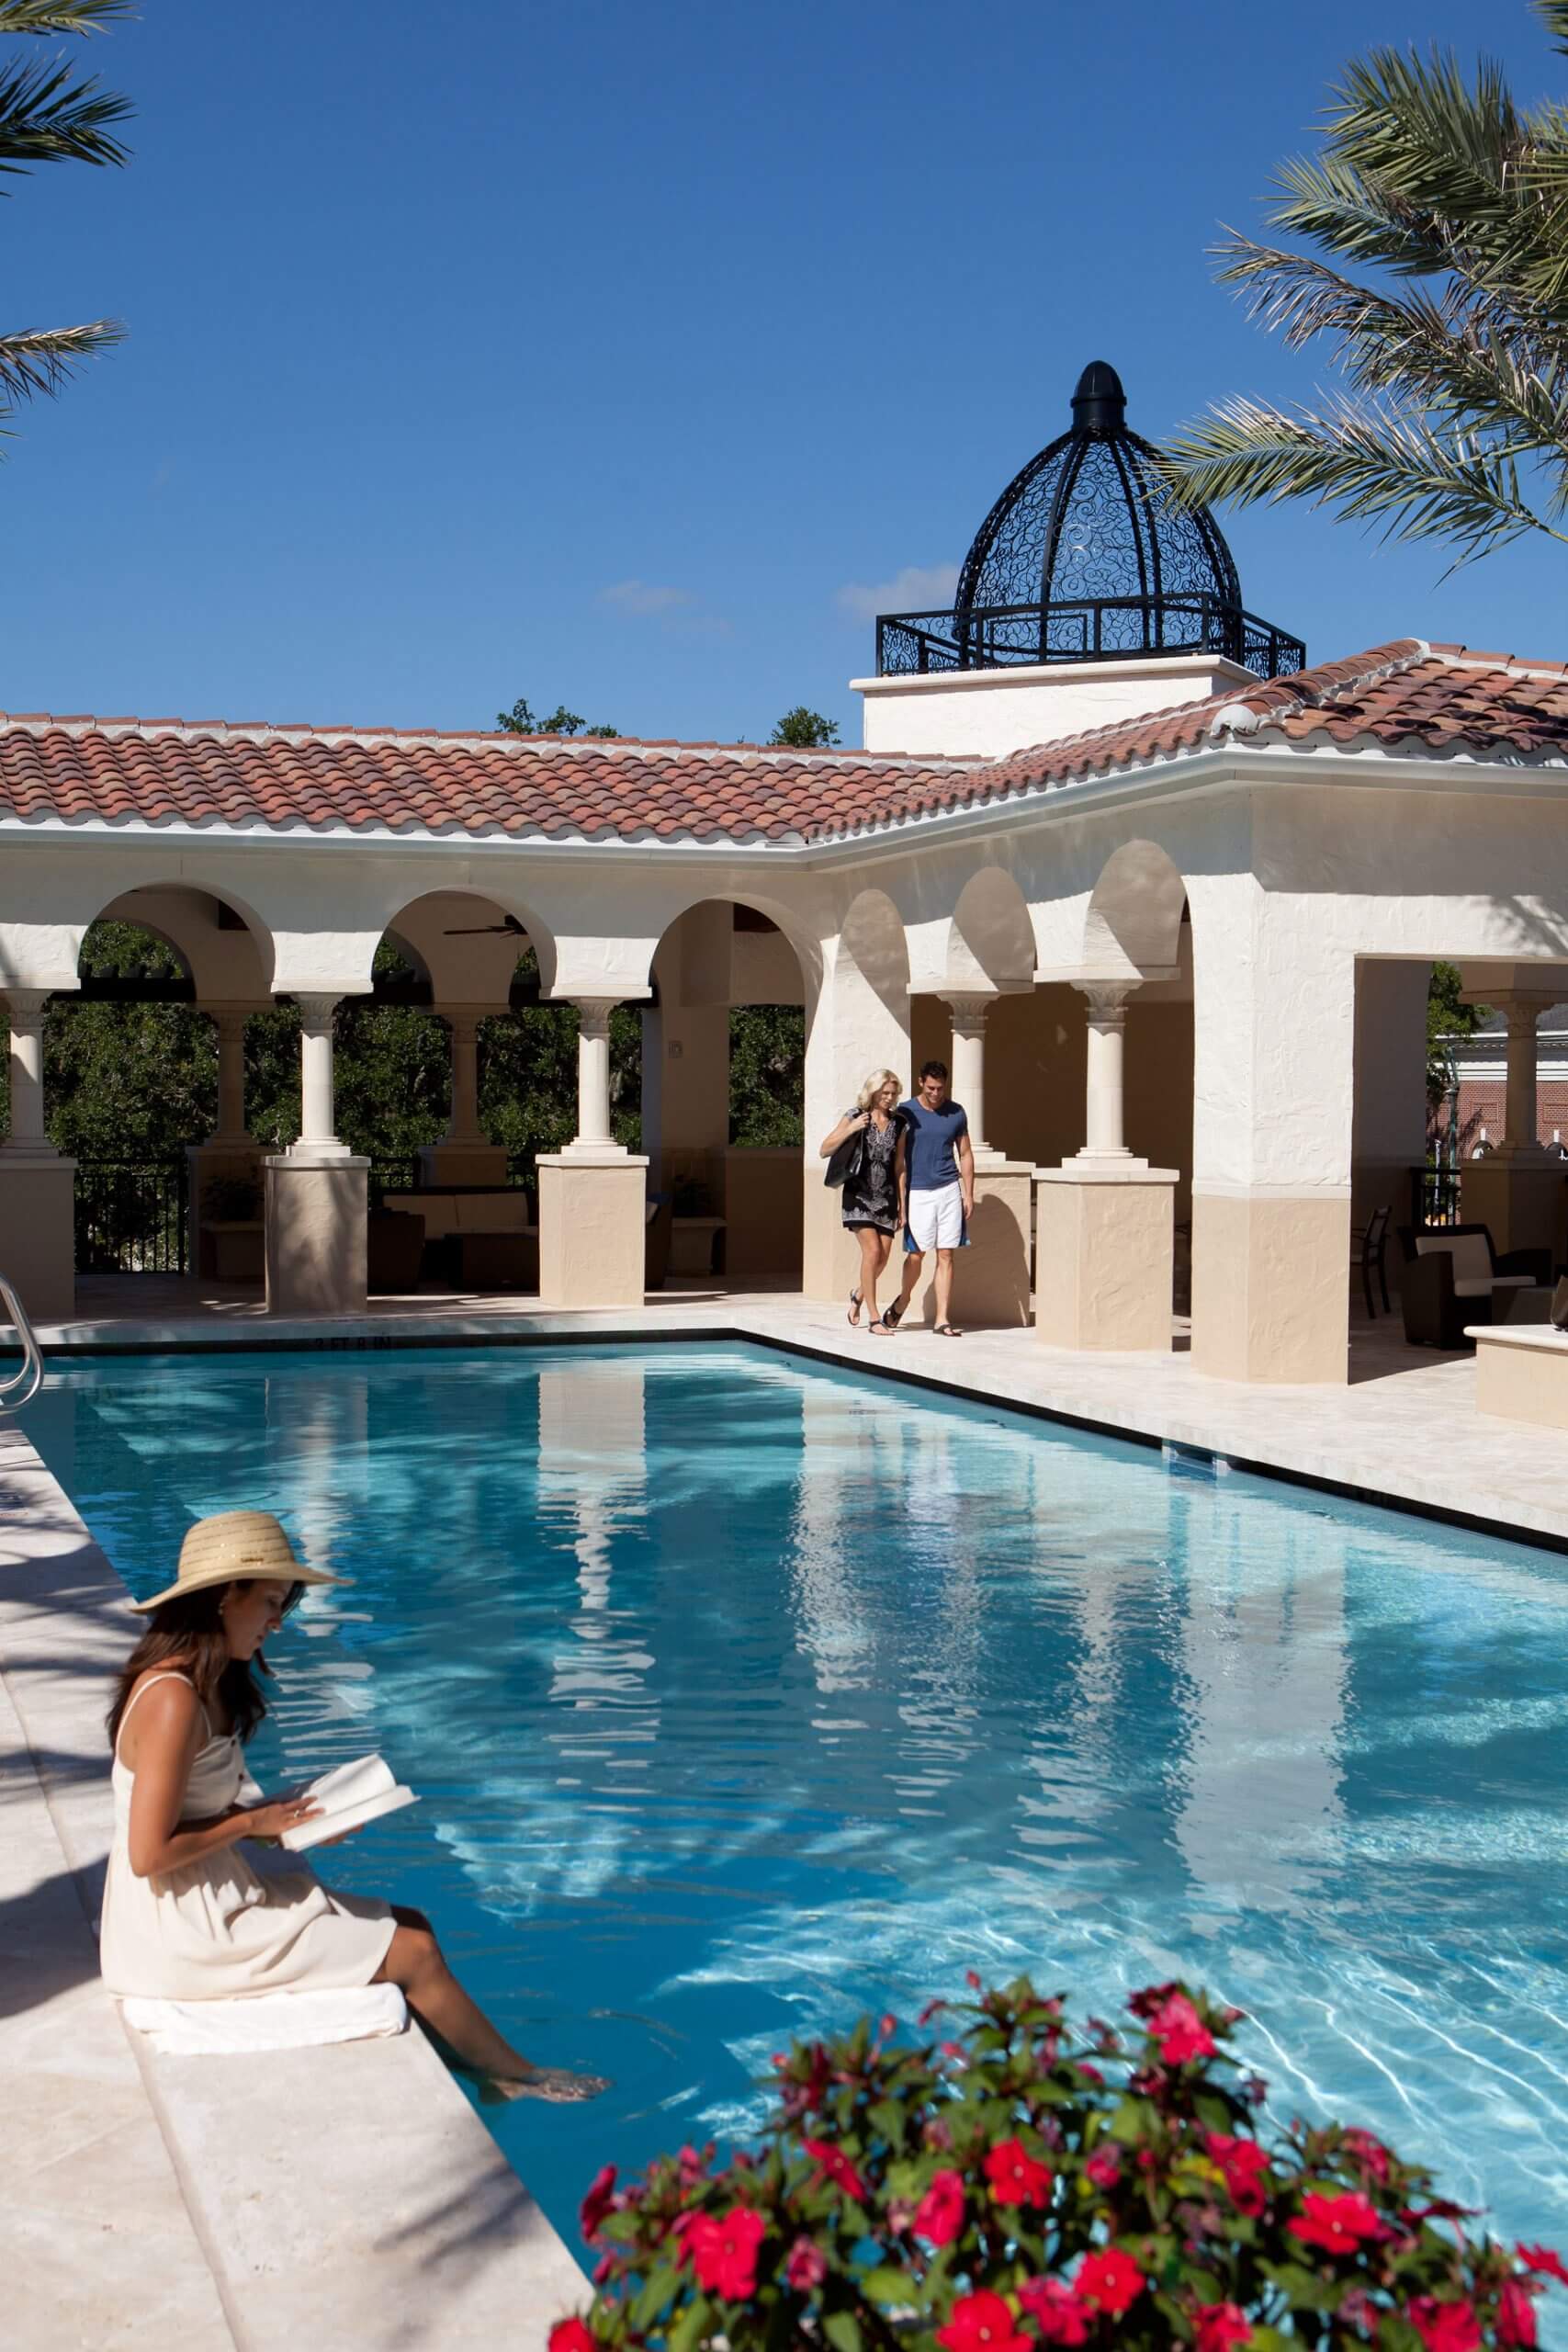 In the News: Alfond Inn Expansion to Include Second Pool, Café, Wellness Spa